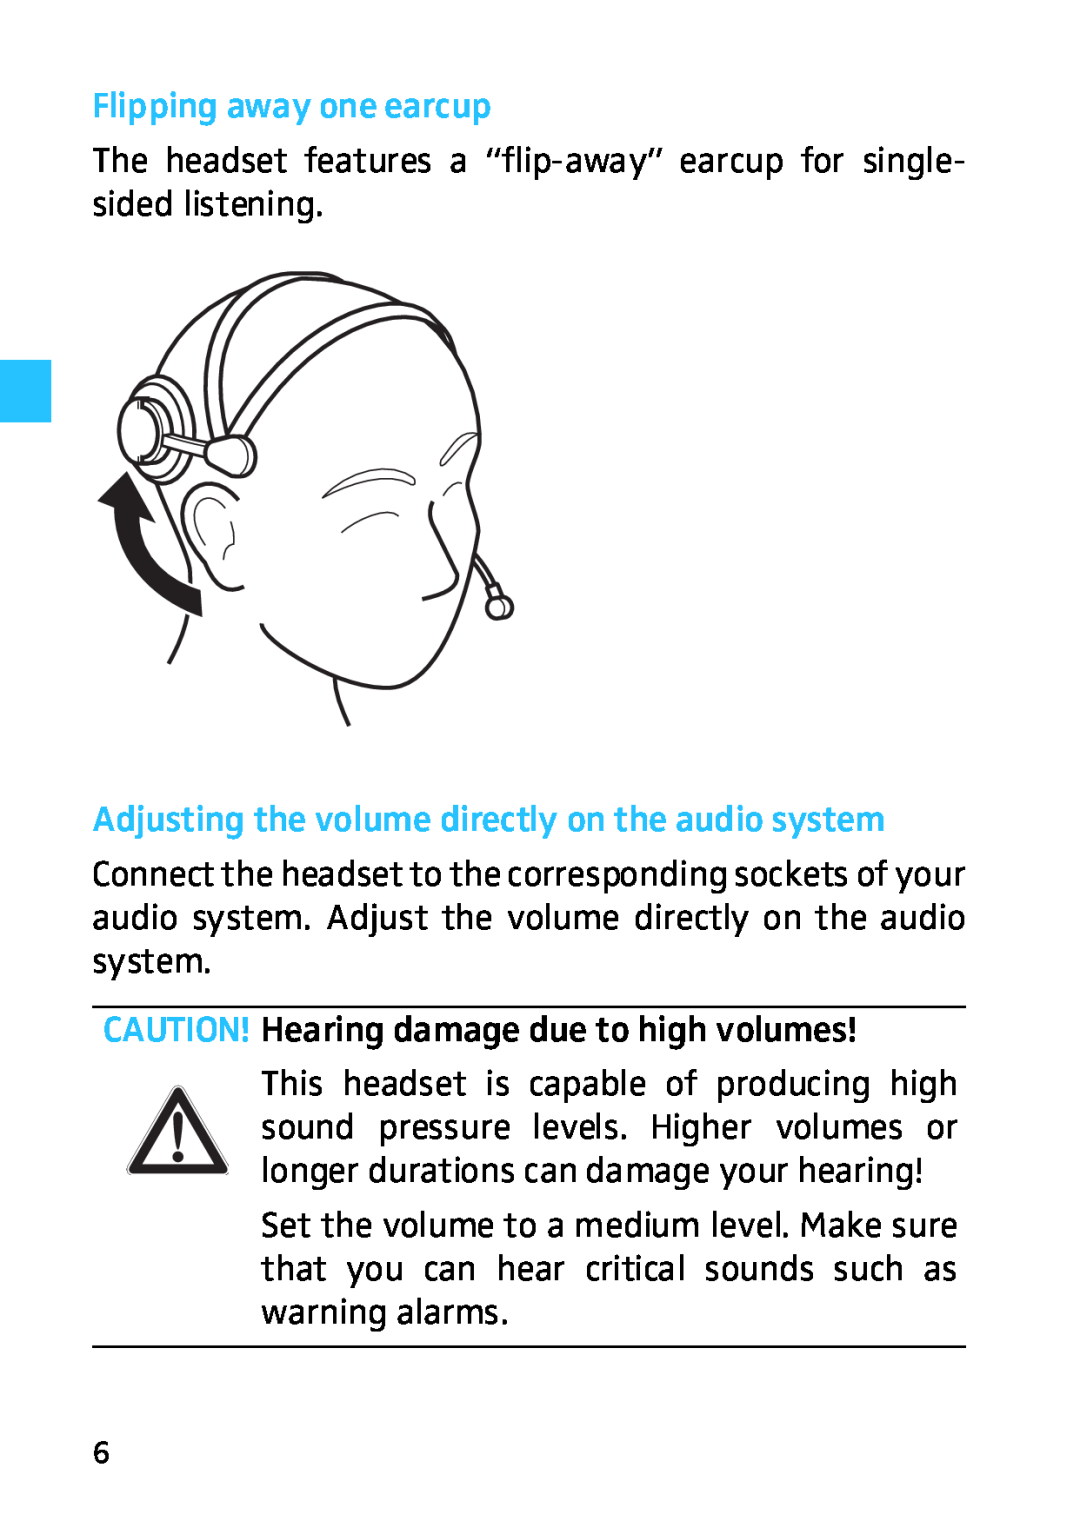 Sennheiser HME 46, HMD 46 manual Flipping away one earcup, Adjusting the volume directly on the audio system 